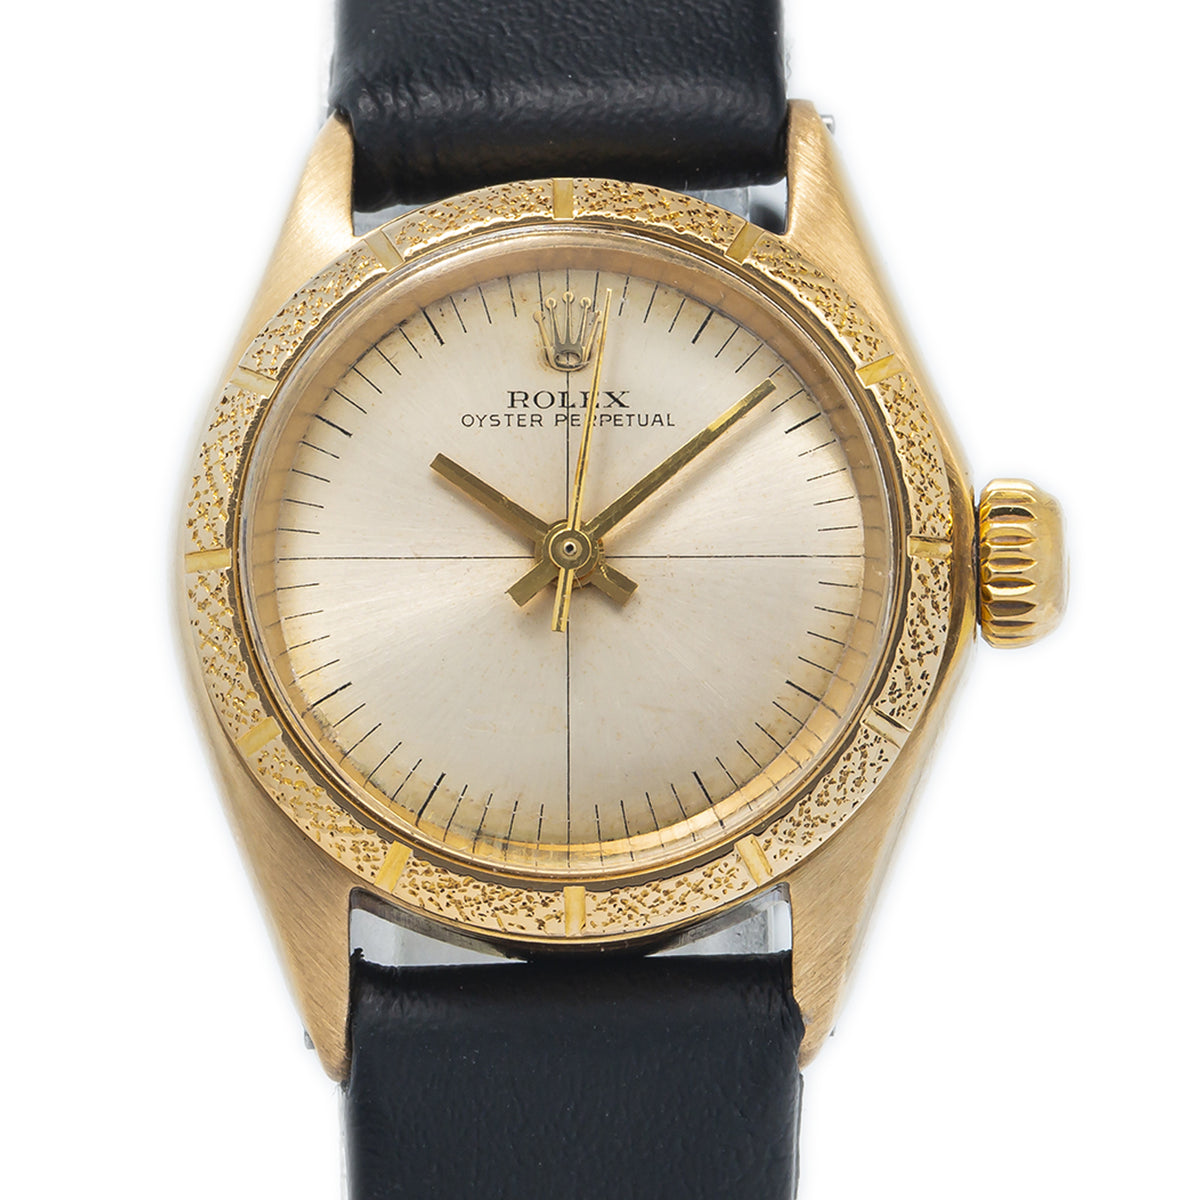 Rolex Oyster Perpetual Zephyr 6801 18k Yellow Gold Silver Dial Ladies Watch 25mm